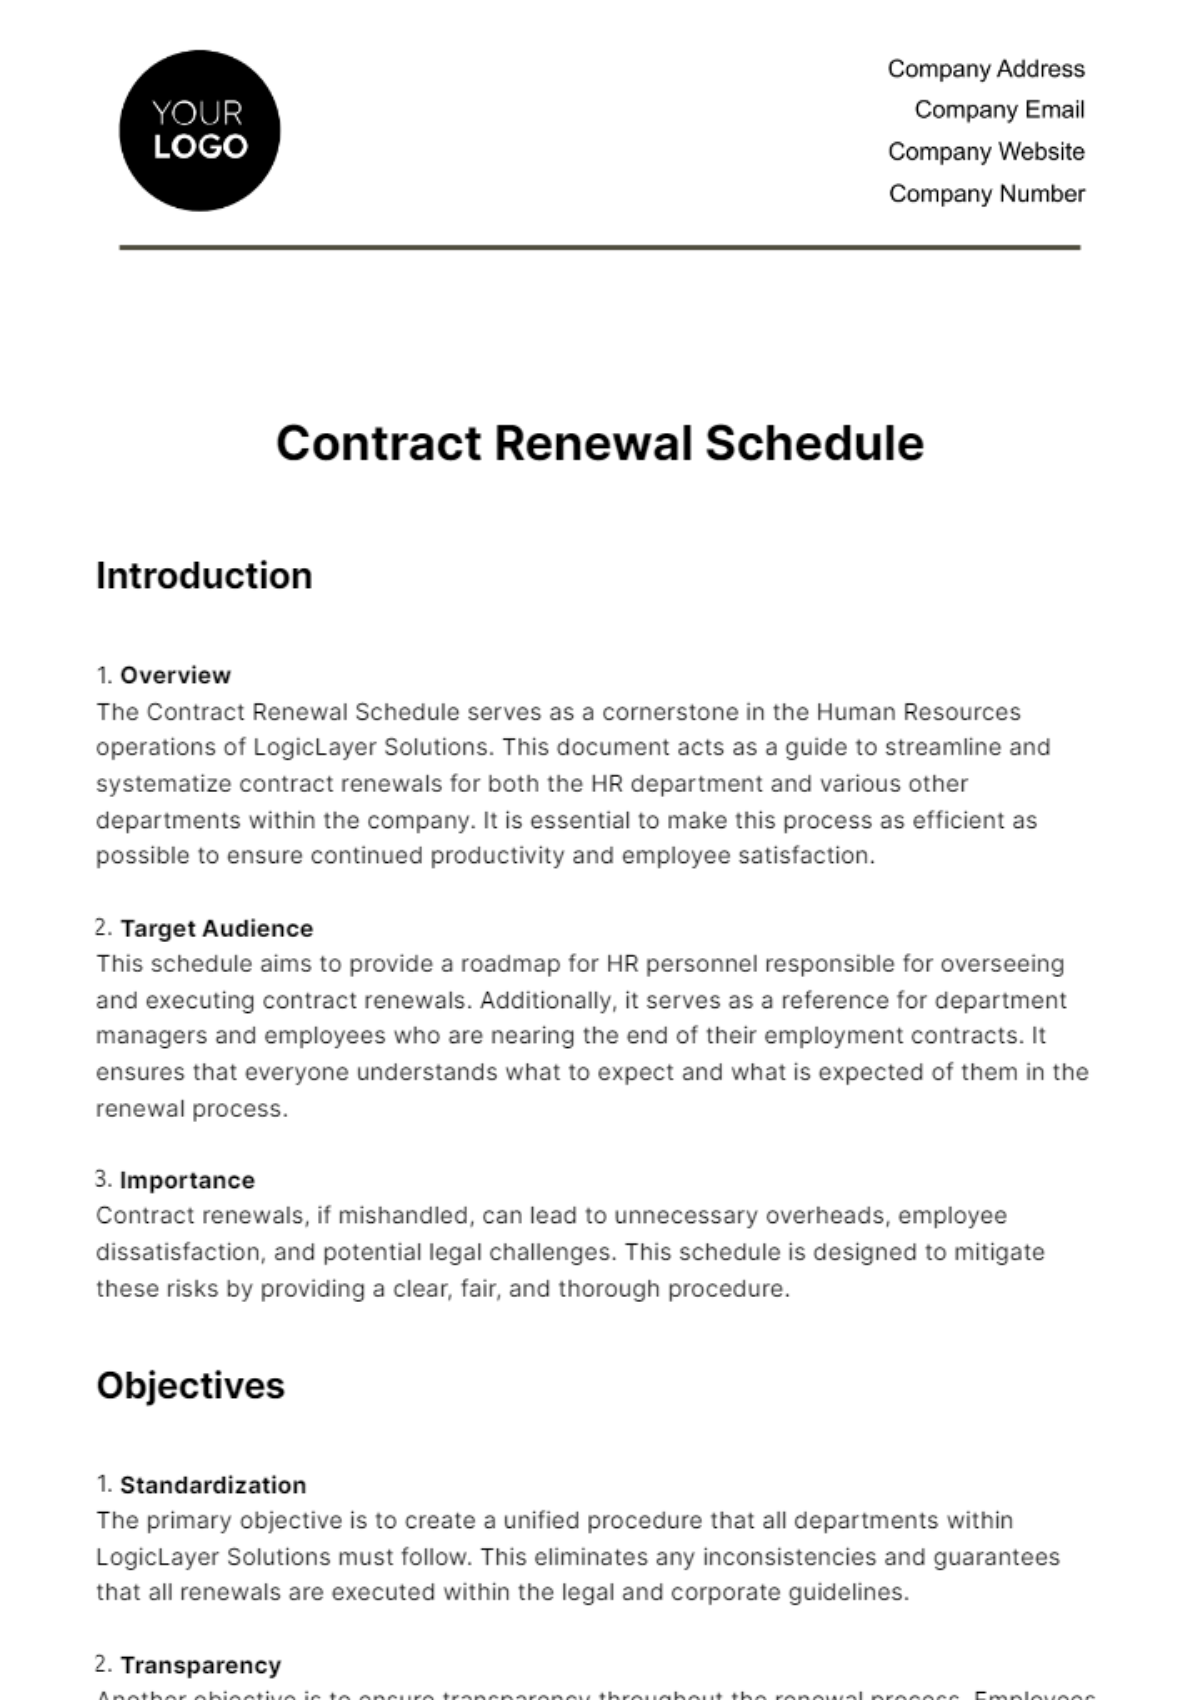 Free Contract Renewal Schedule HR Template